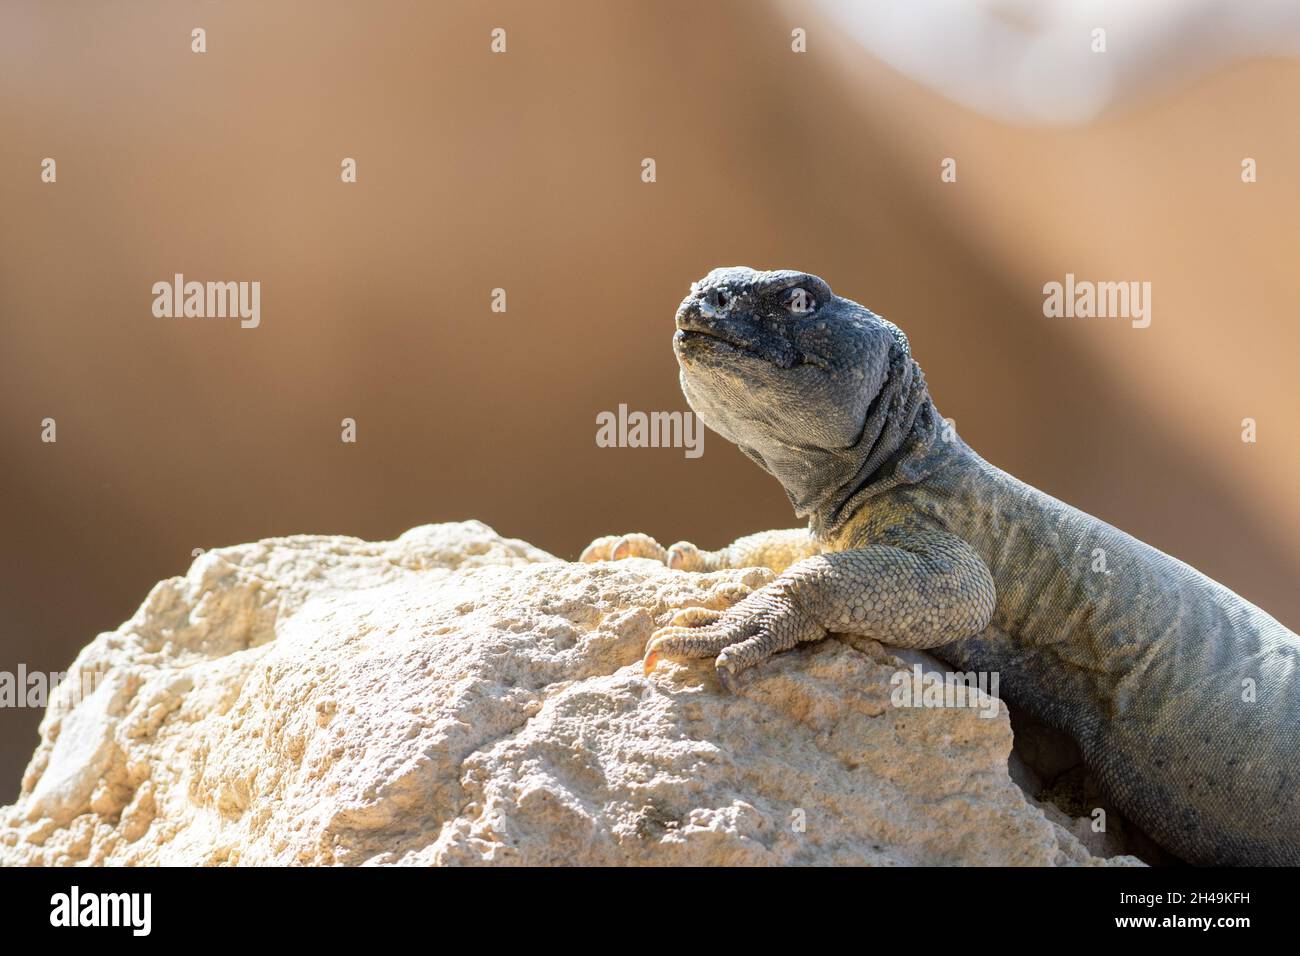 A green Leptien's Spiny Tailed Lizard (Uromastyx aegyptia leptieni) resting on a rock very close up. Stock Photo